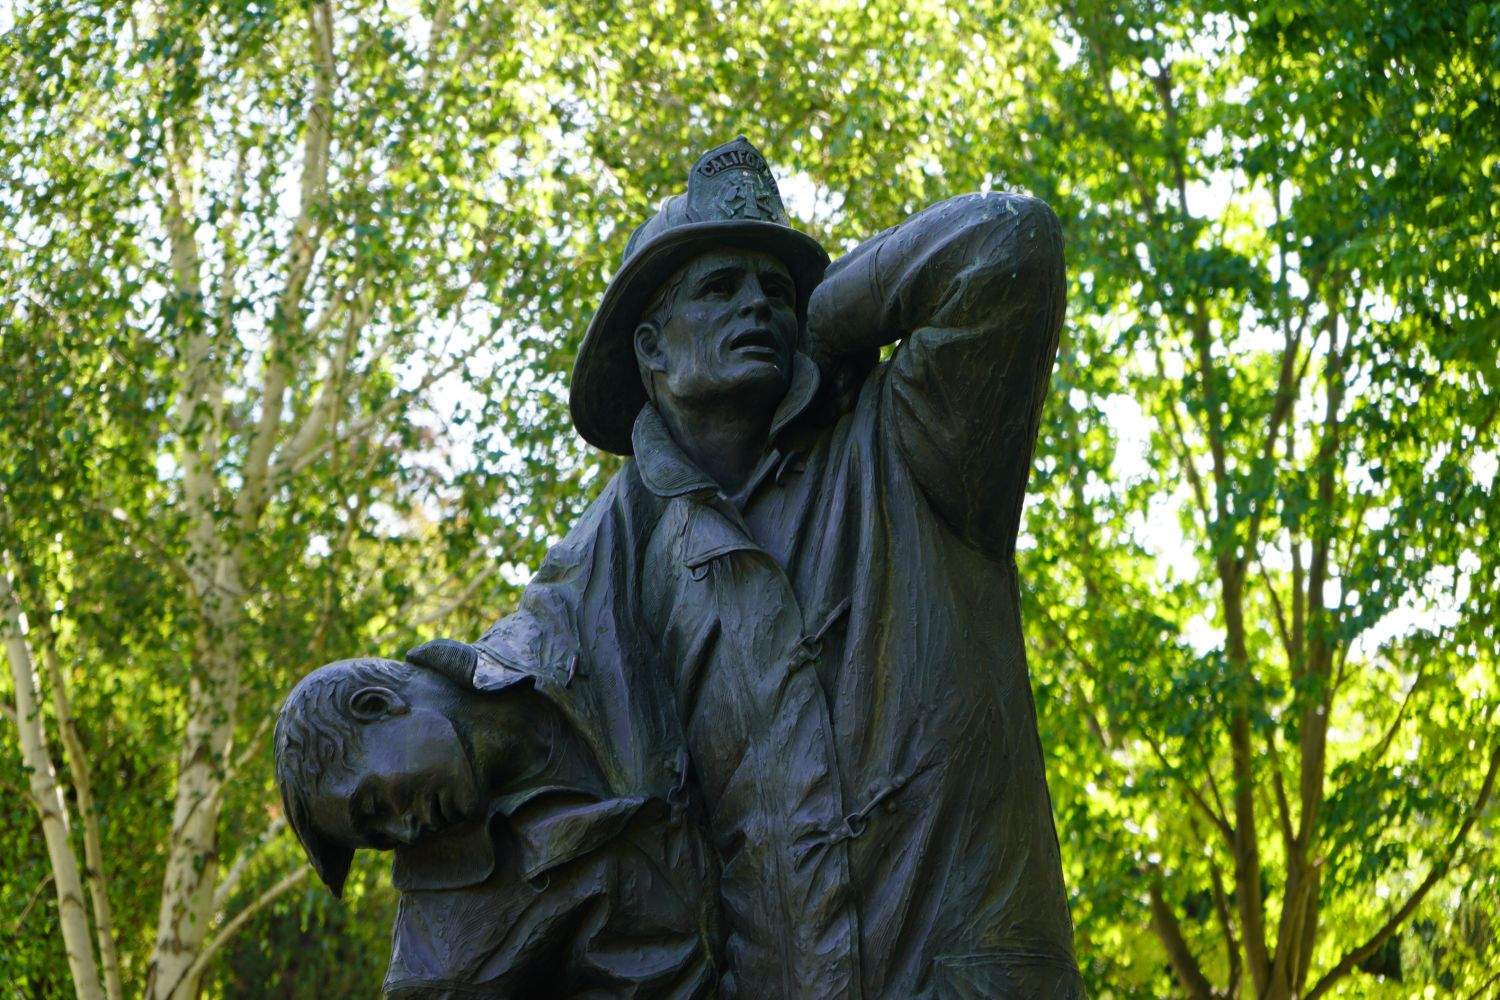 FRONT OF STATUE OF FIREFIGHTER HOLDING A FALLEN FIREFIGHTER